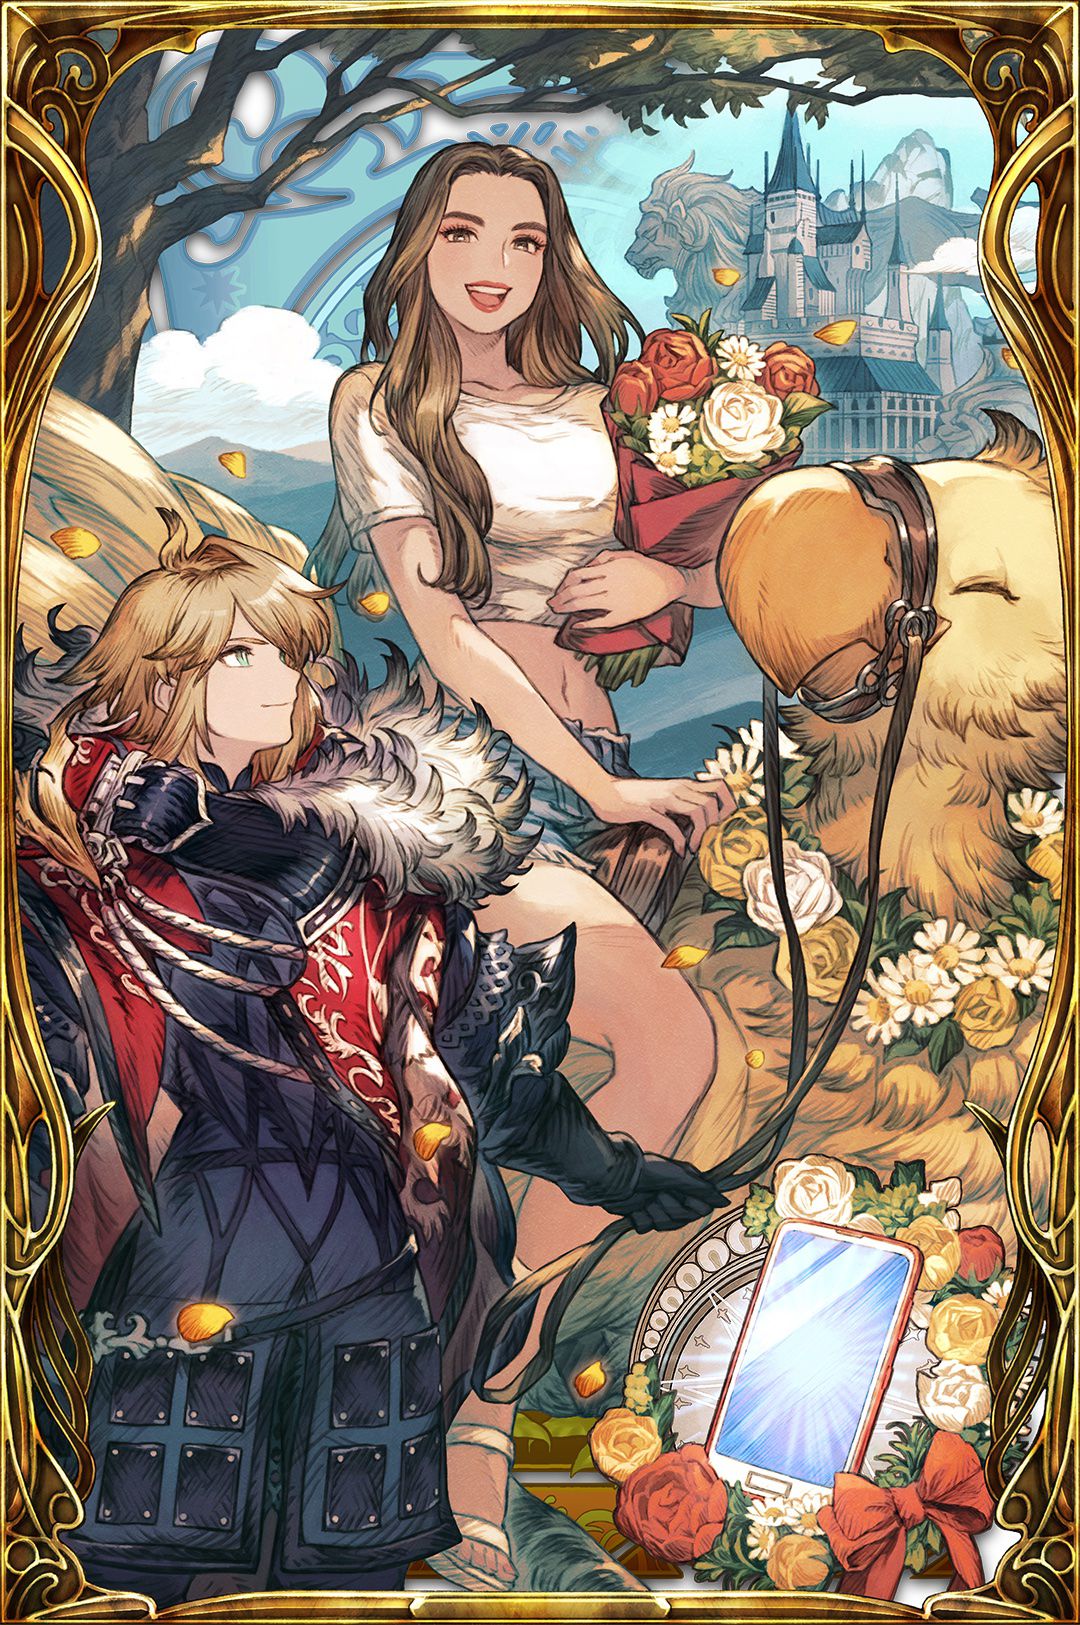 Card art of Addison Rae in War of the Visions: Final Fantasy Brave Exvius. She is wearing a crop top and holding a bouquet of flowers while riding a Chocobo. Another character in the bottom left looks up at her.